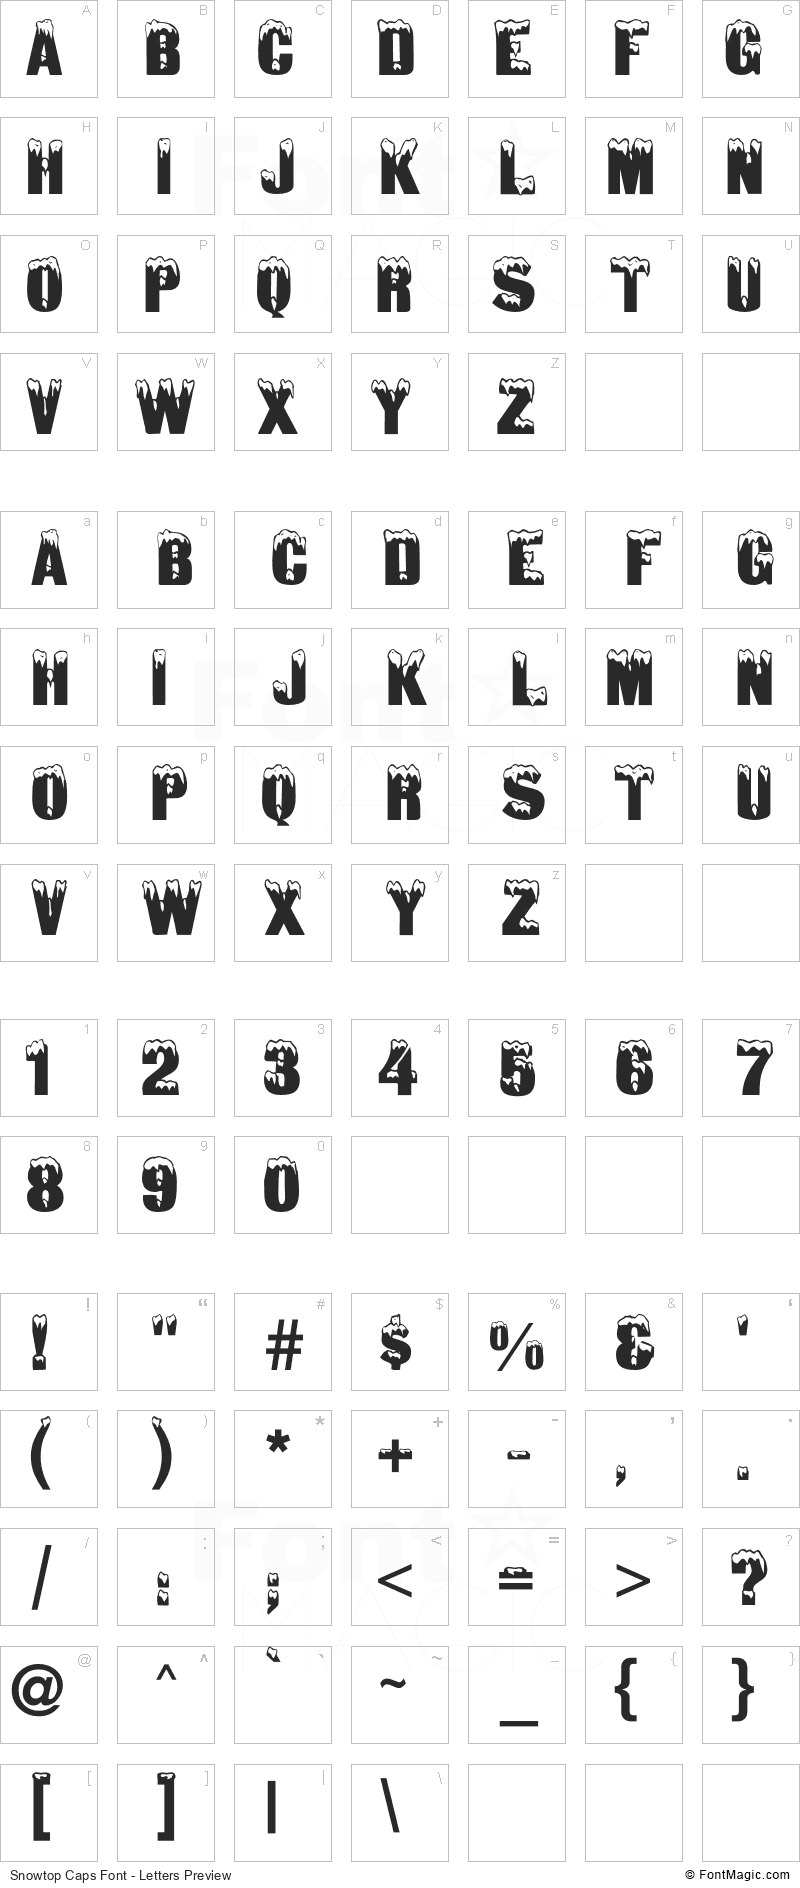 Snowtop Caps Font - All Latters Preview Chart